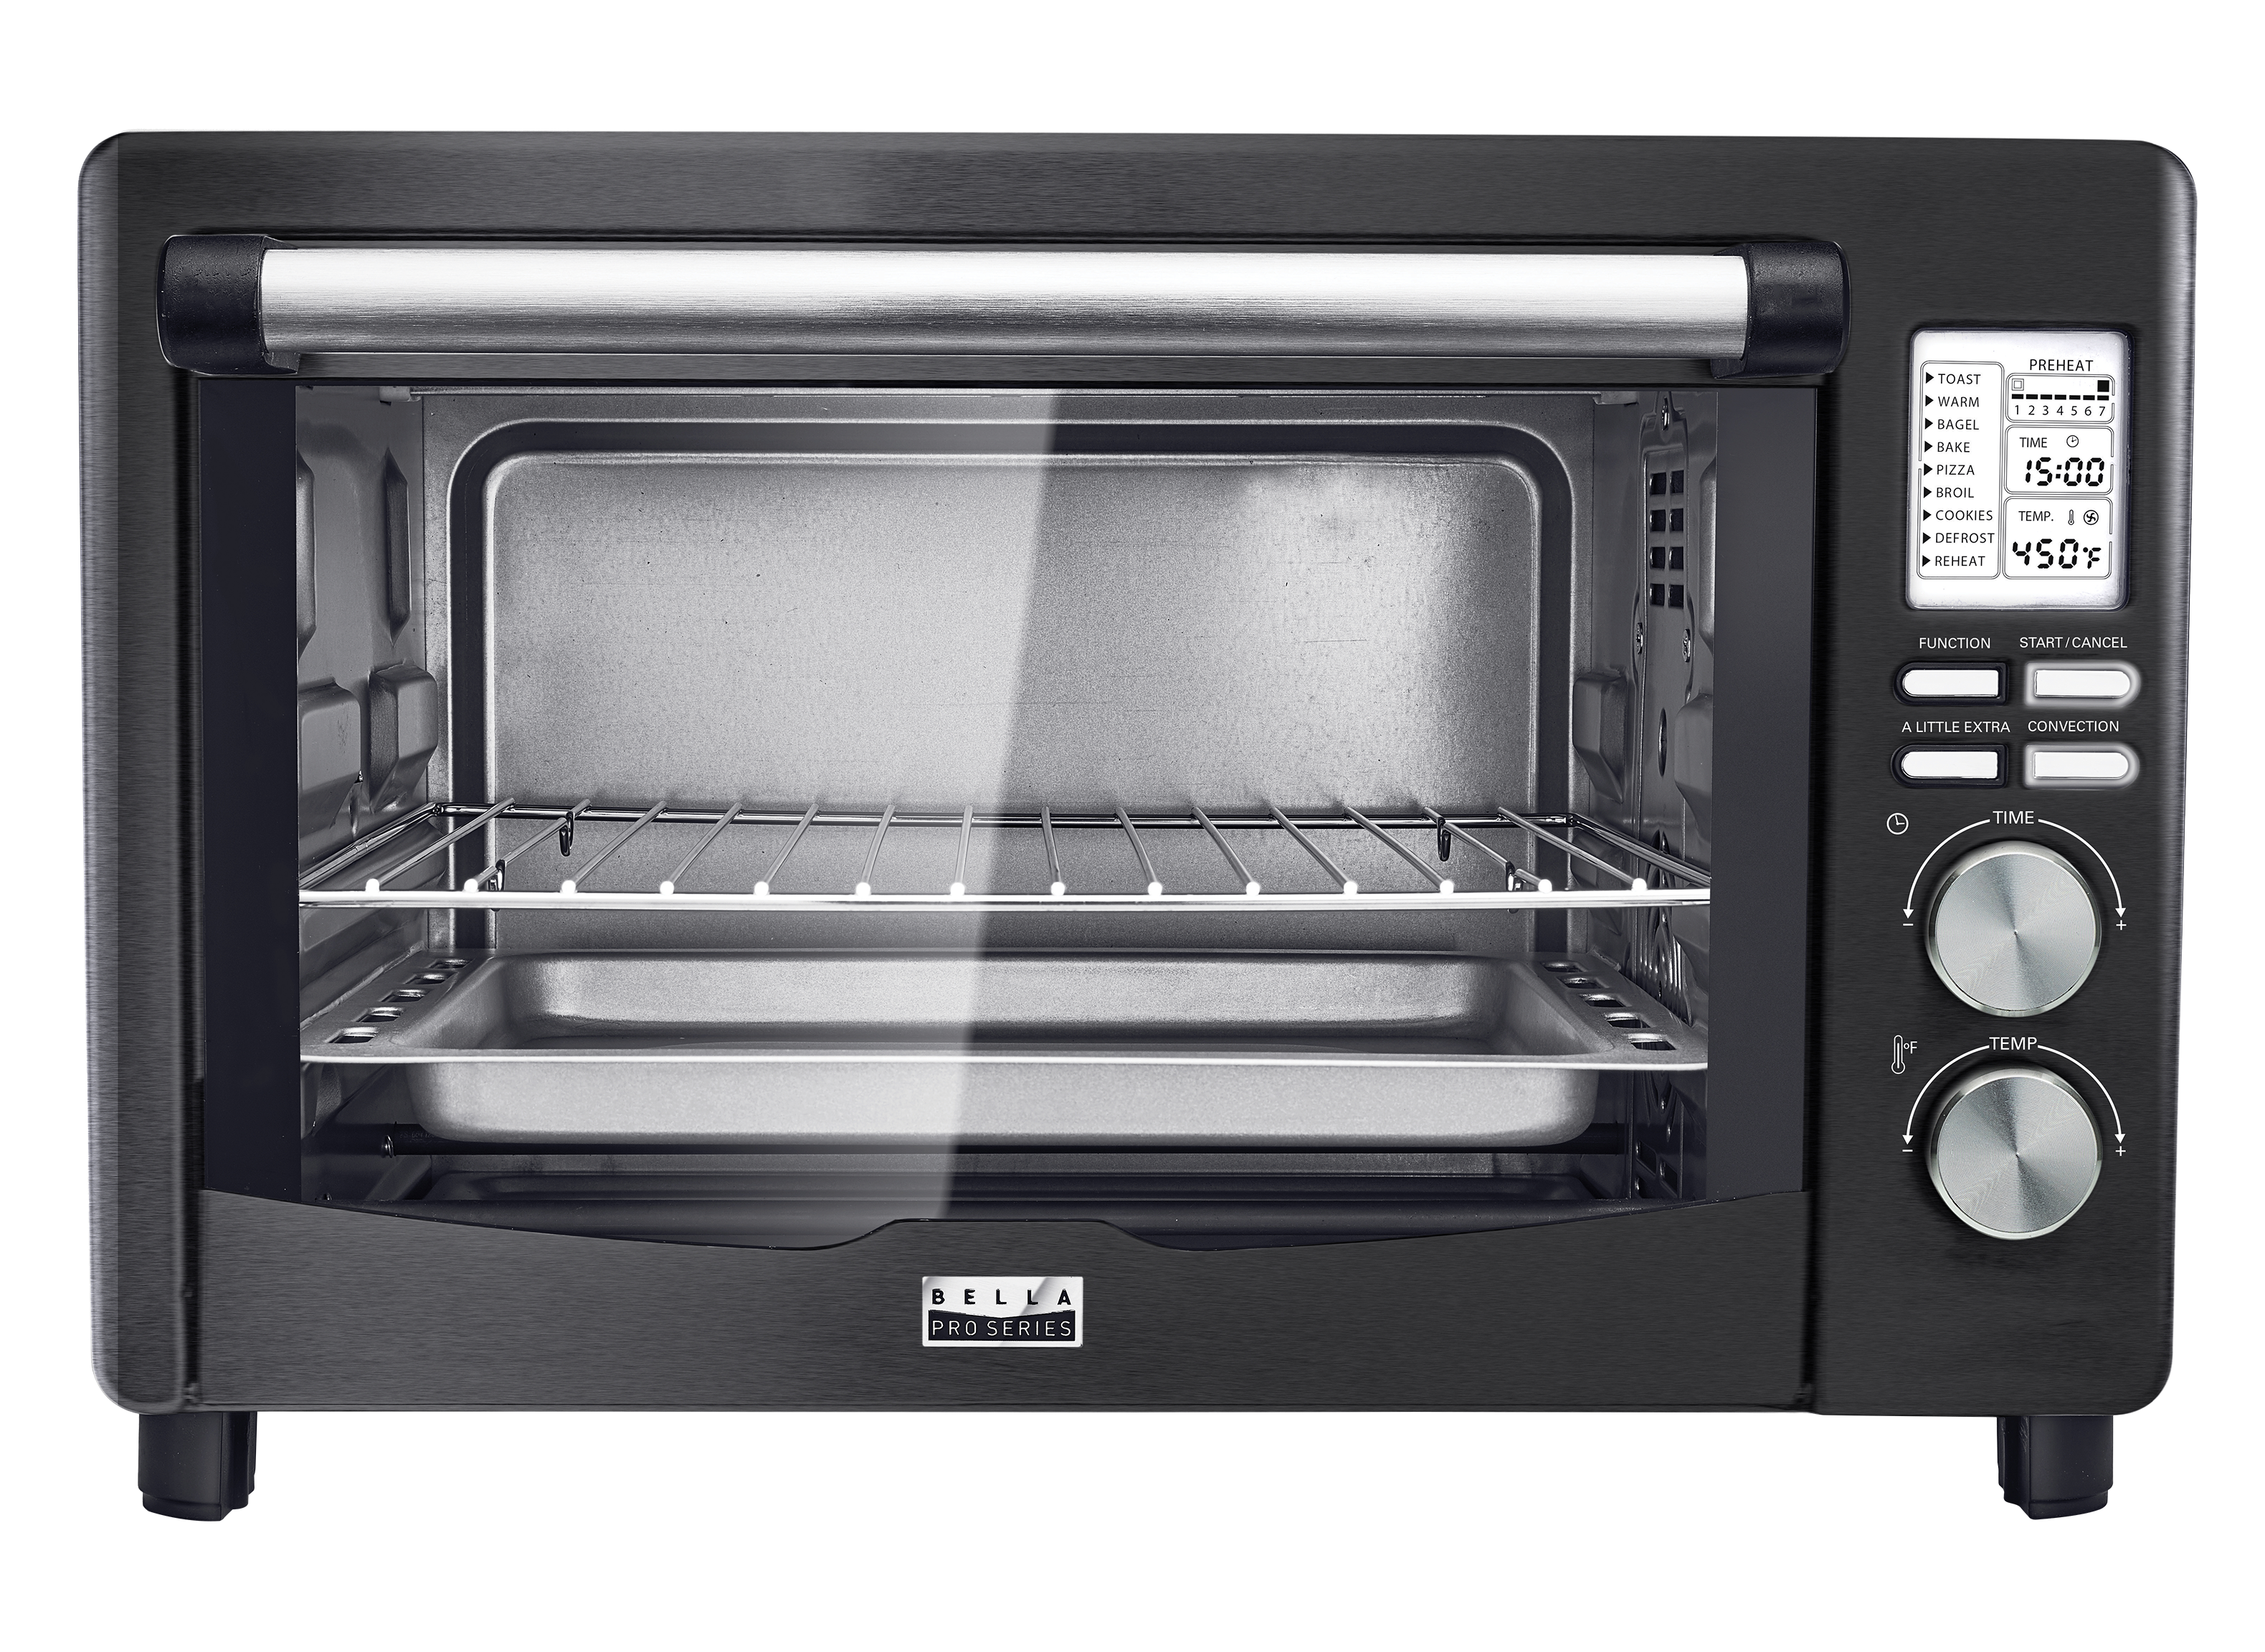 https://crdms.images.consumerreports.org/prod/products/cr/models/395994-toaster-ovens-bella-pro-series-6-slice-digital-90060-10001062.png